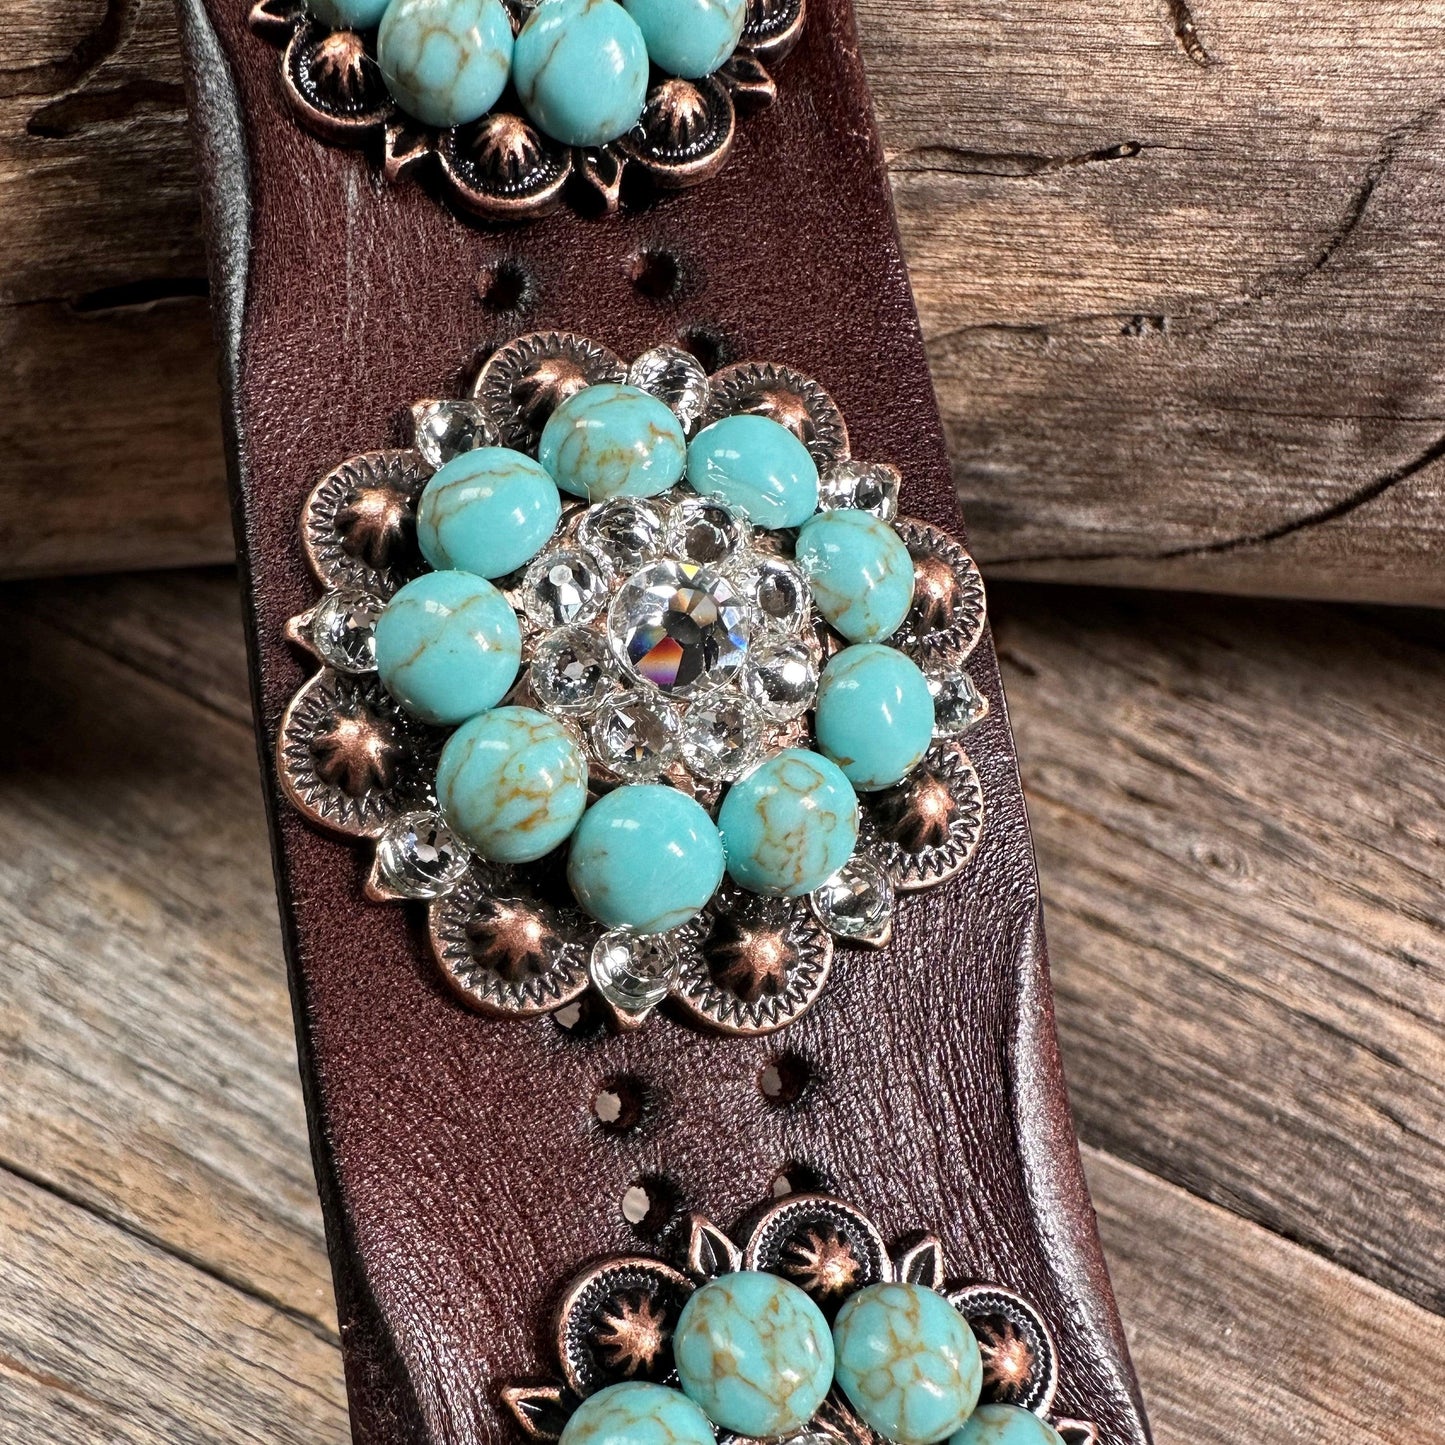 Turquoise and Clear Leather Bracelet LB100 - RODEO DRIVE